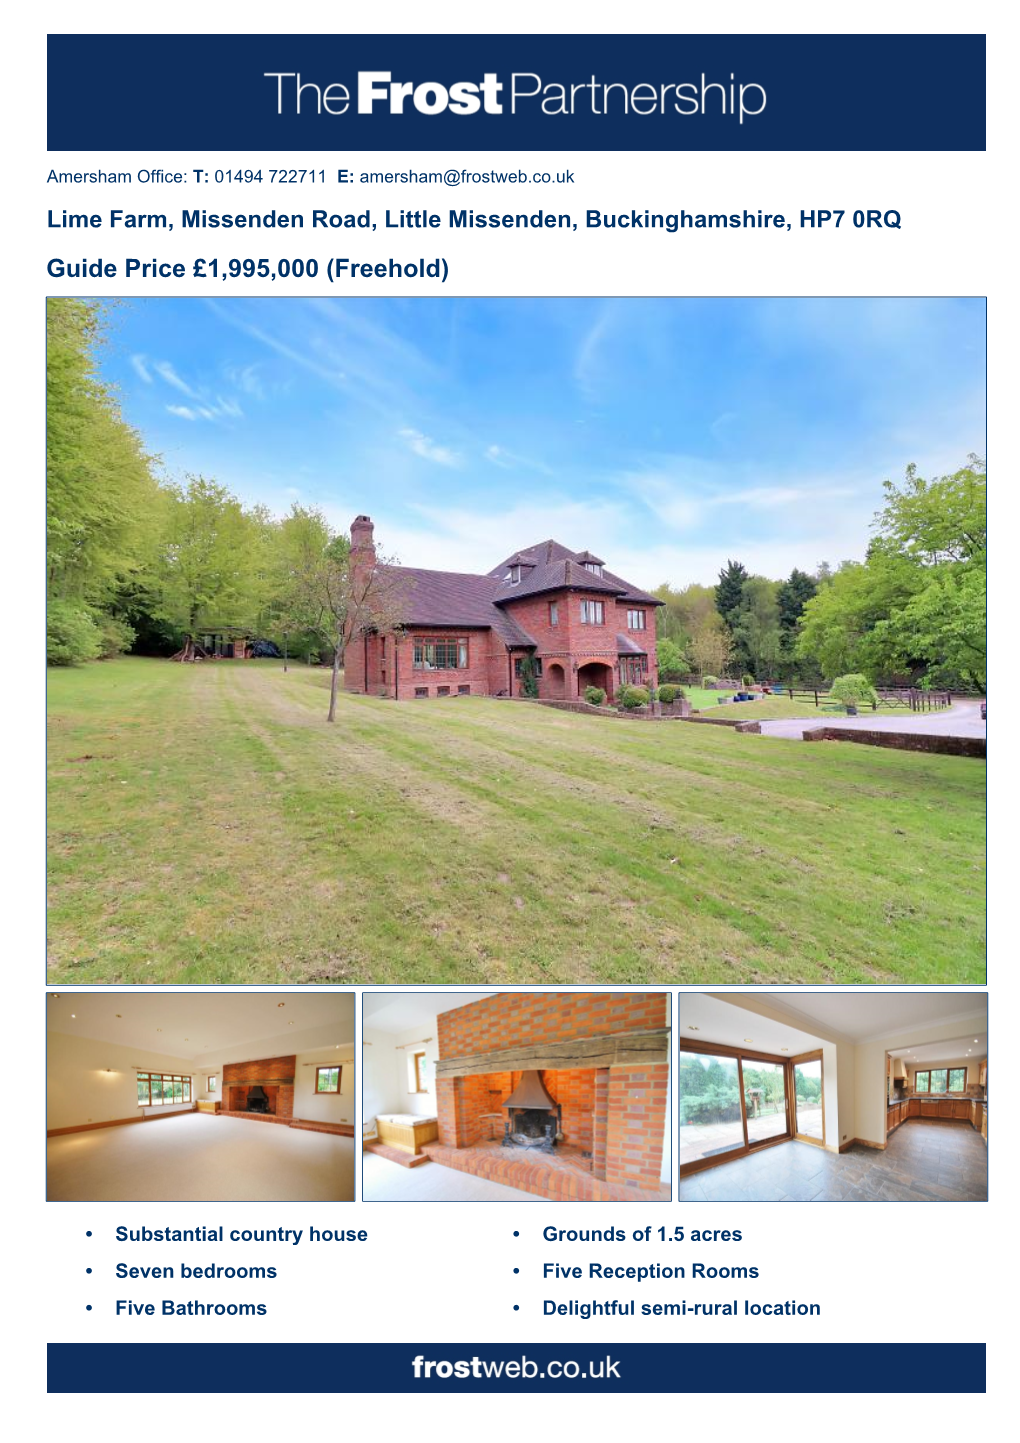 Guide Price £1,995,000 (Freehold)